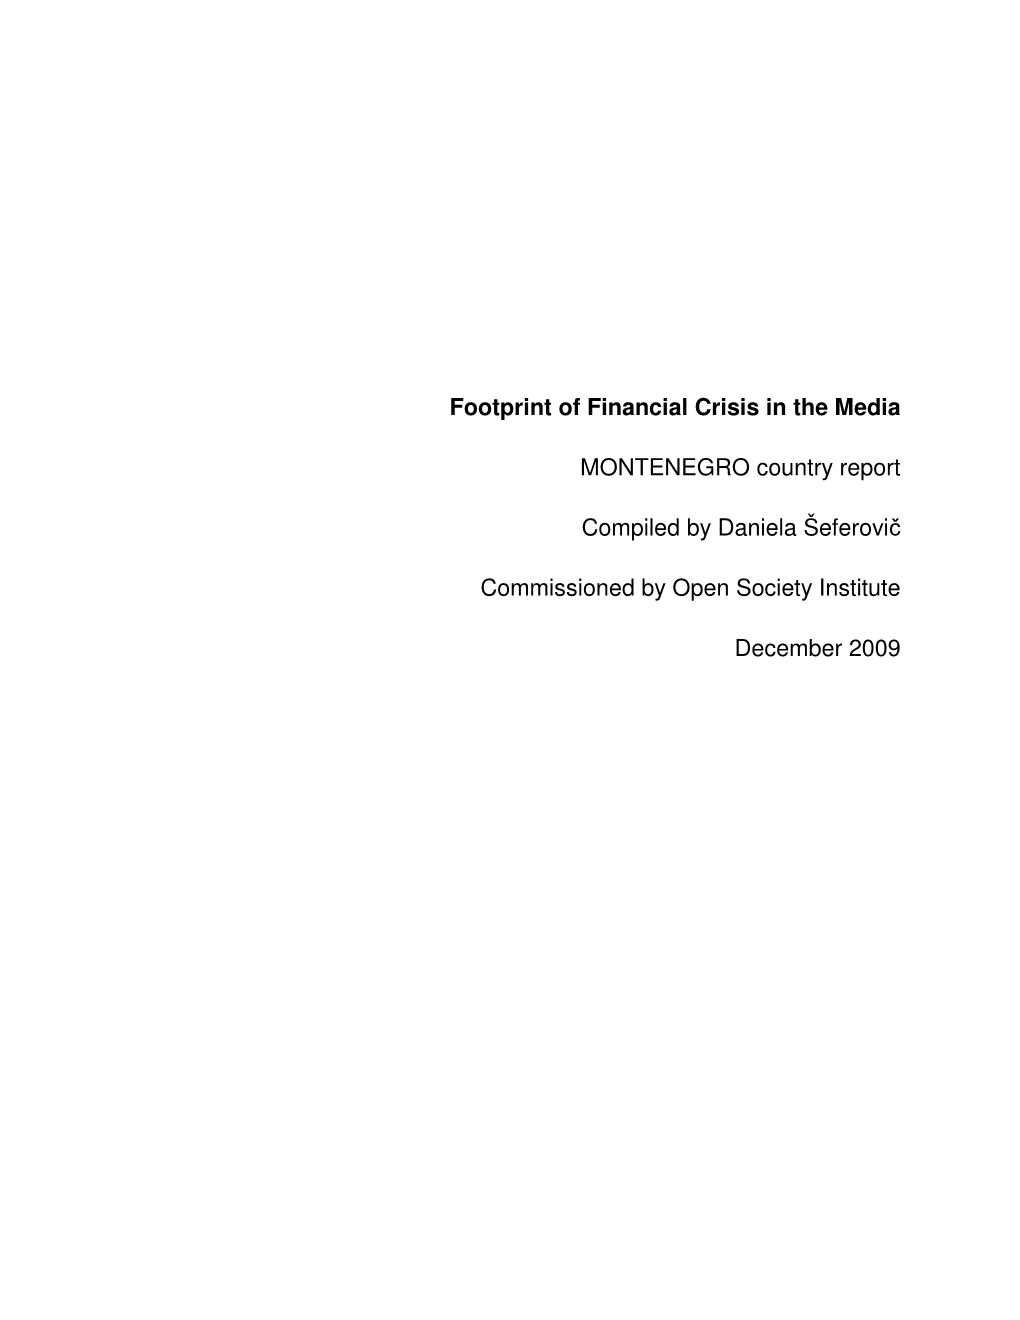 Footprint of Financial Crisis in the Media: Montenegro